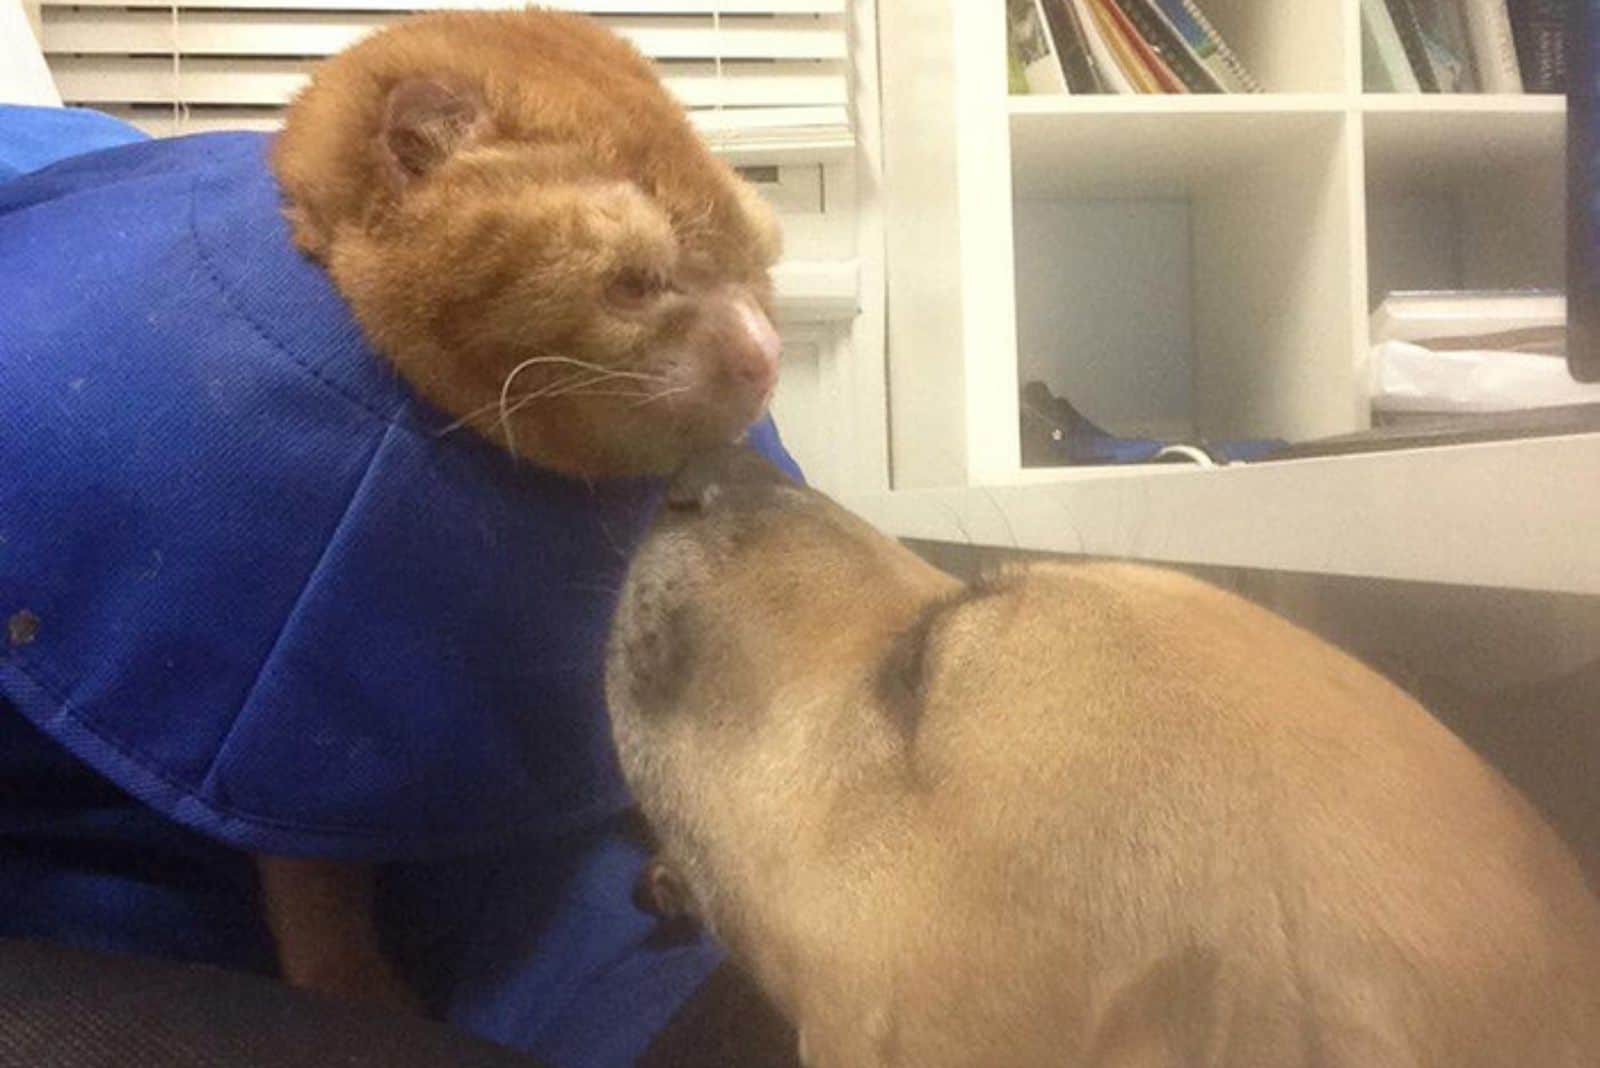 photo of the cat sniffing a dog